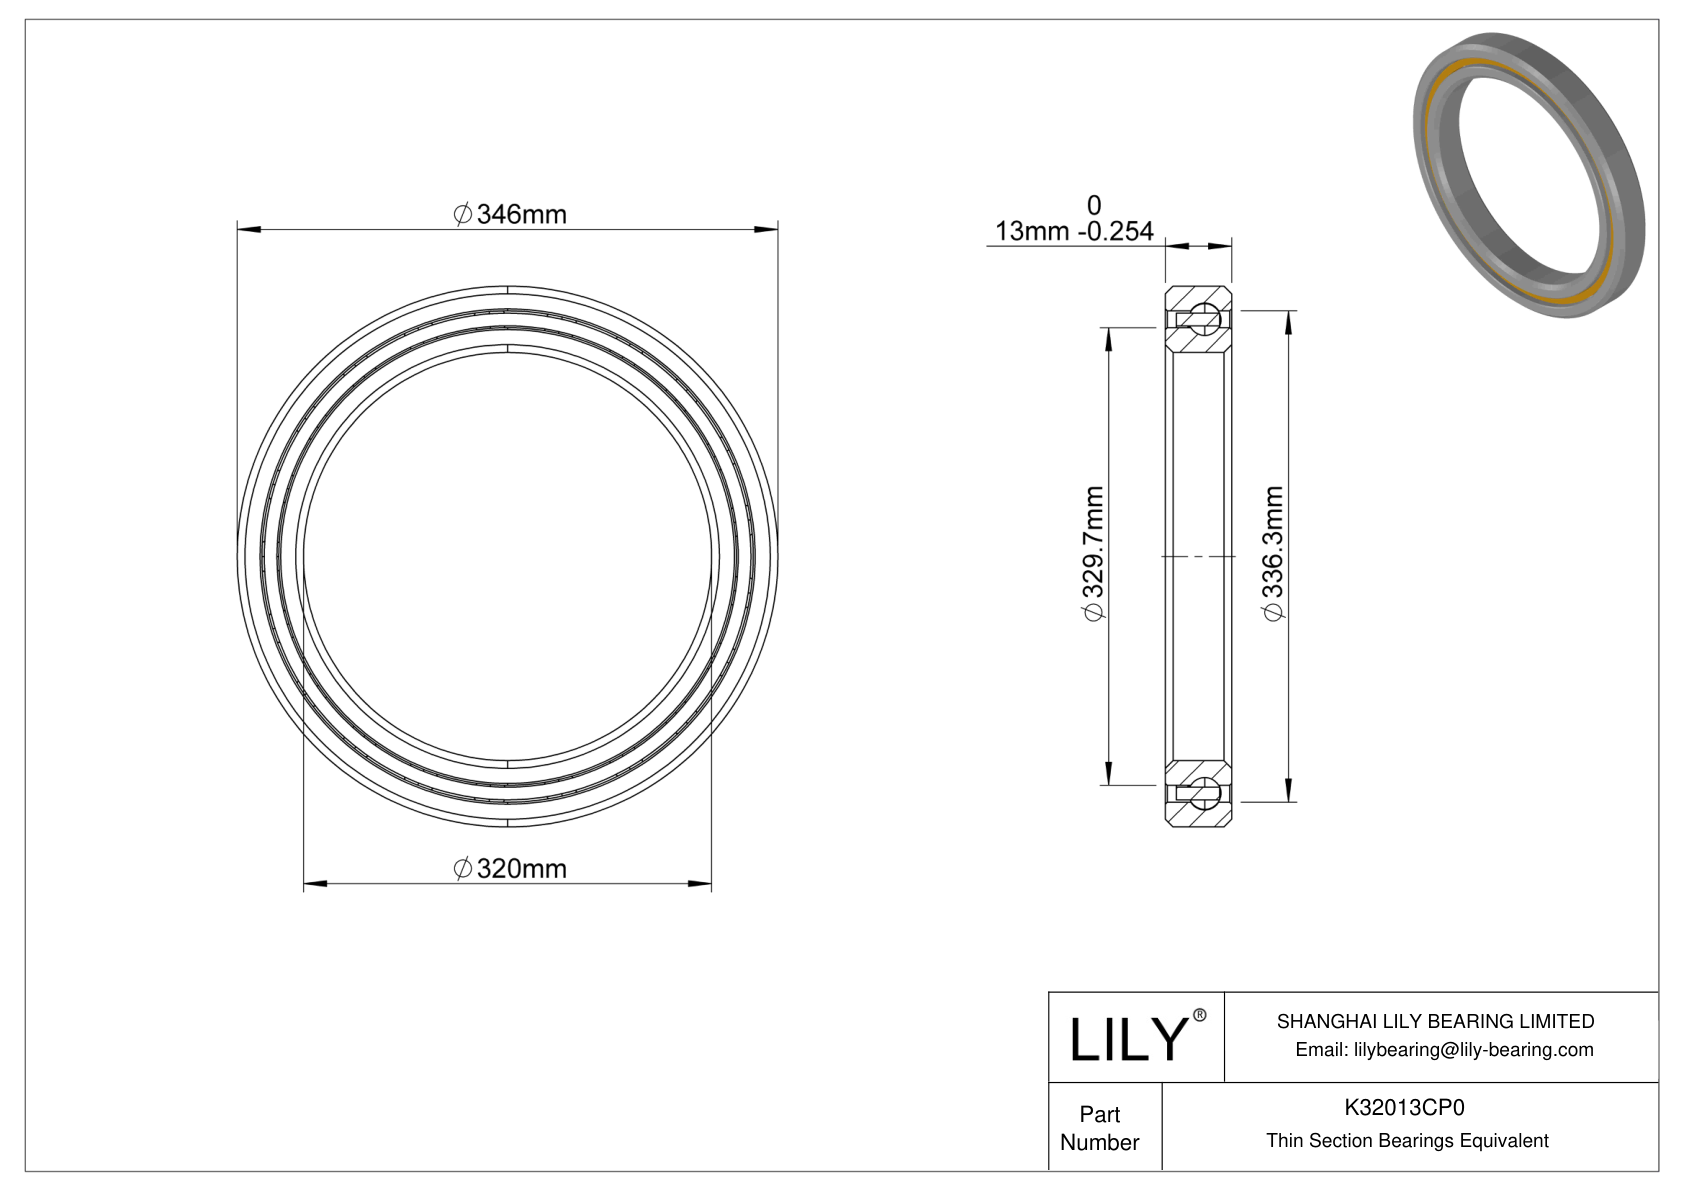 K32013CP0 Constant Section (CS) Bearings cad drawing